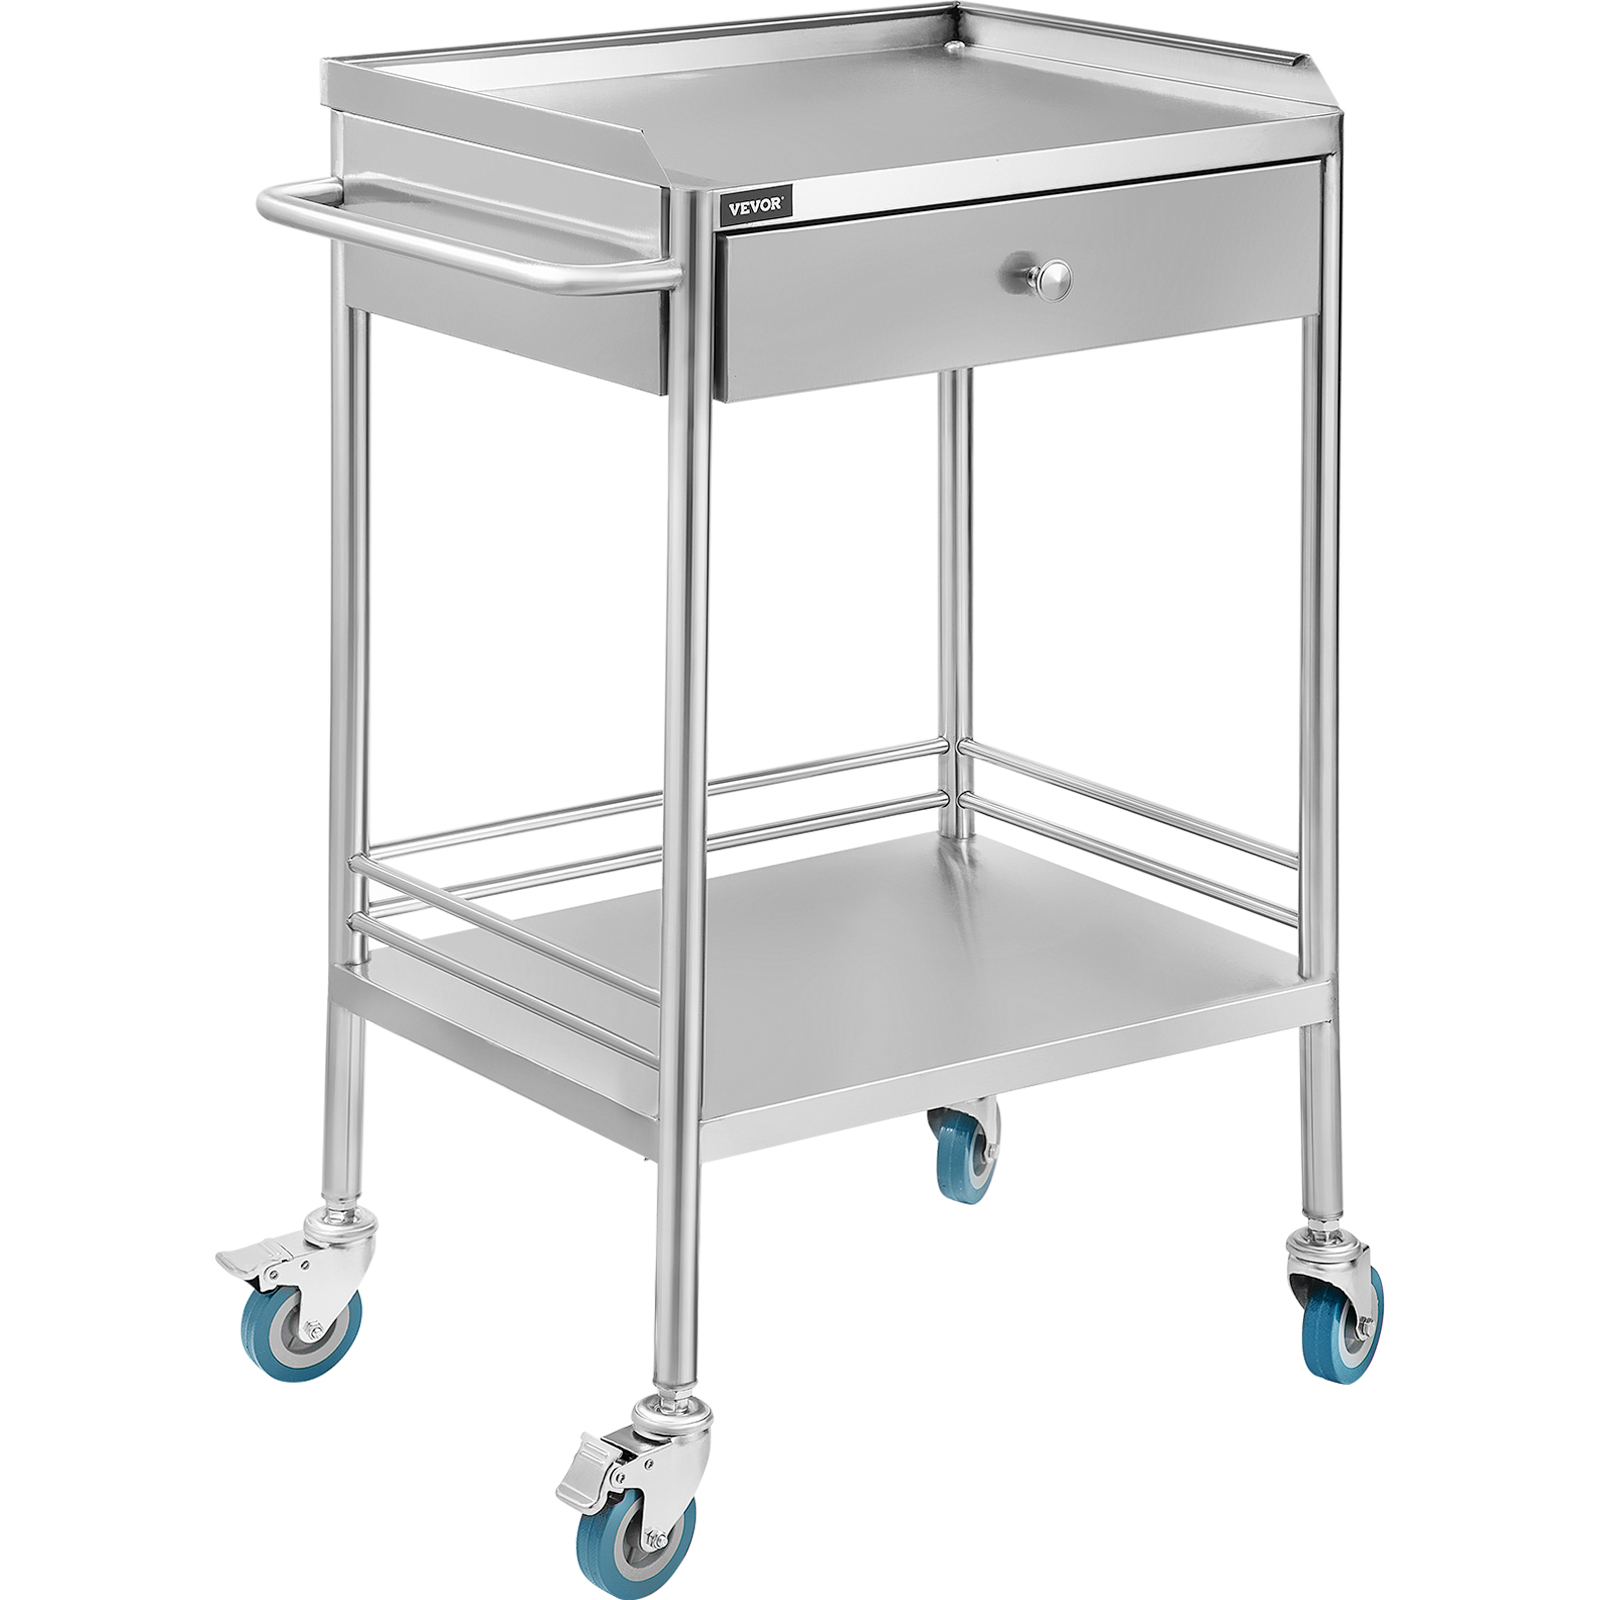 VEVOR Lab Cart Clinic Rolling Serving Cart Mobile Trolley w/ 2 Tiers 1 Drawer от Vevor Many GEOs